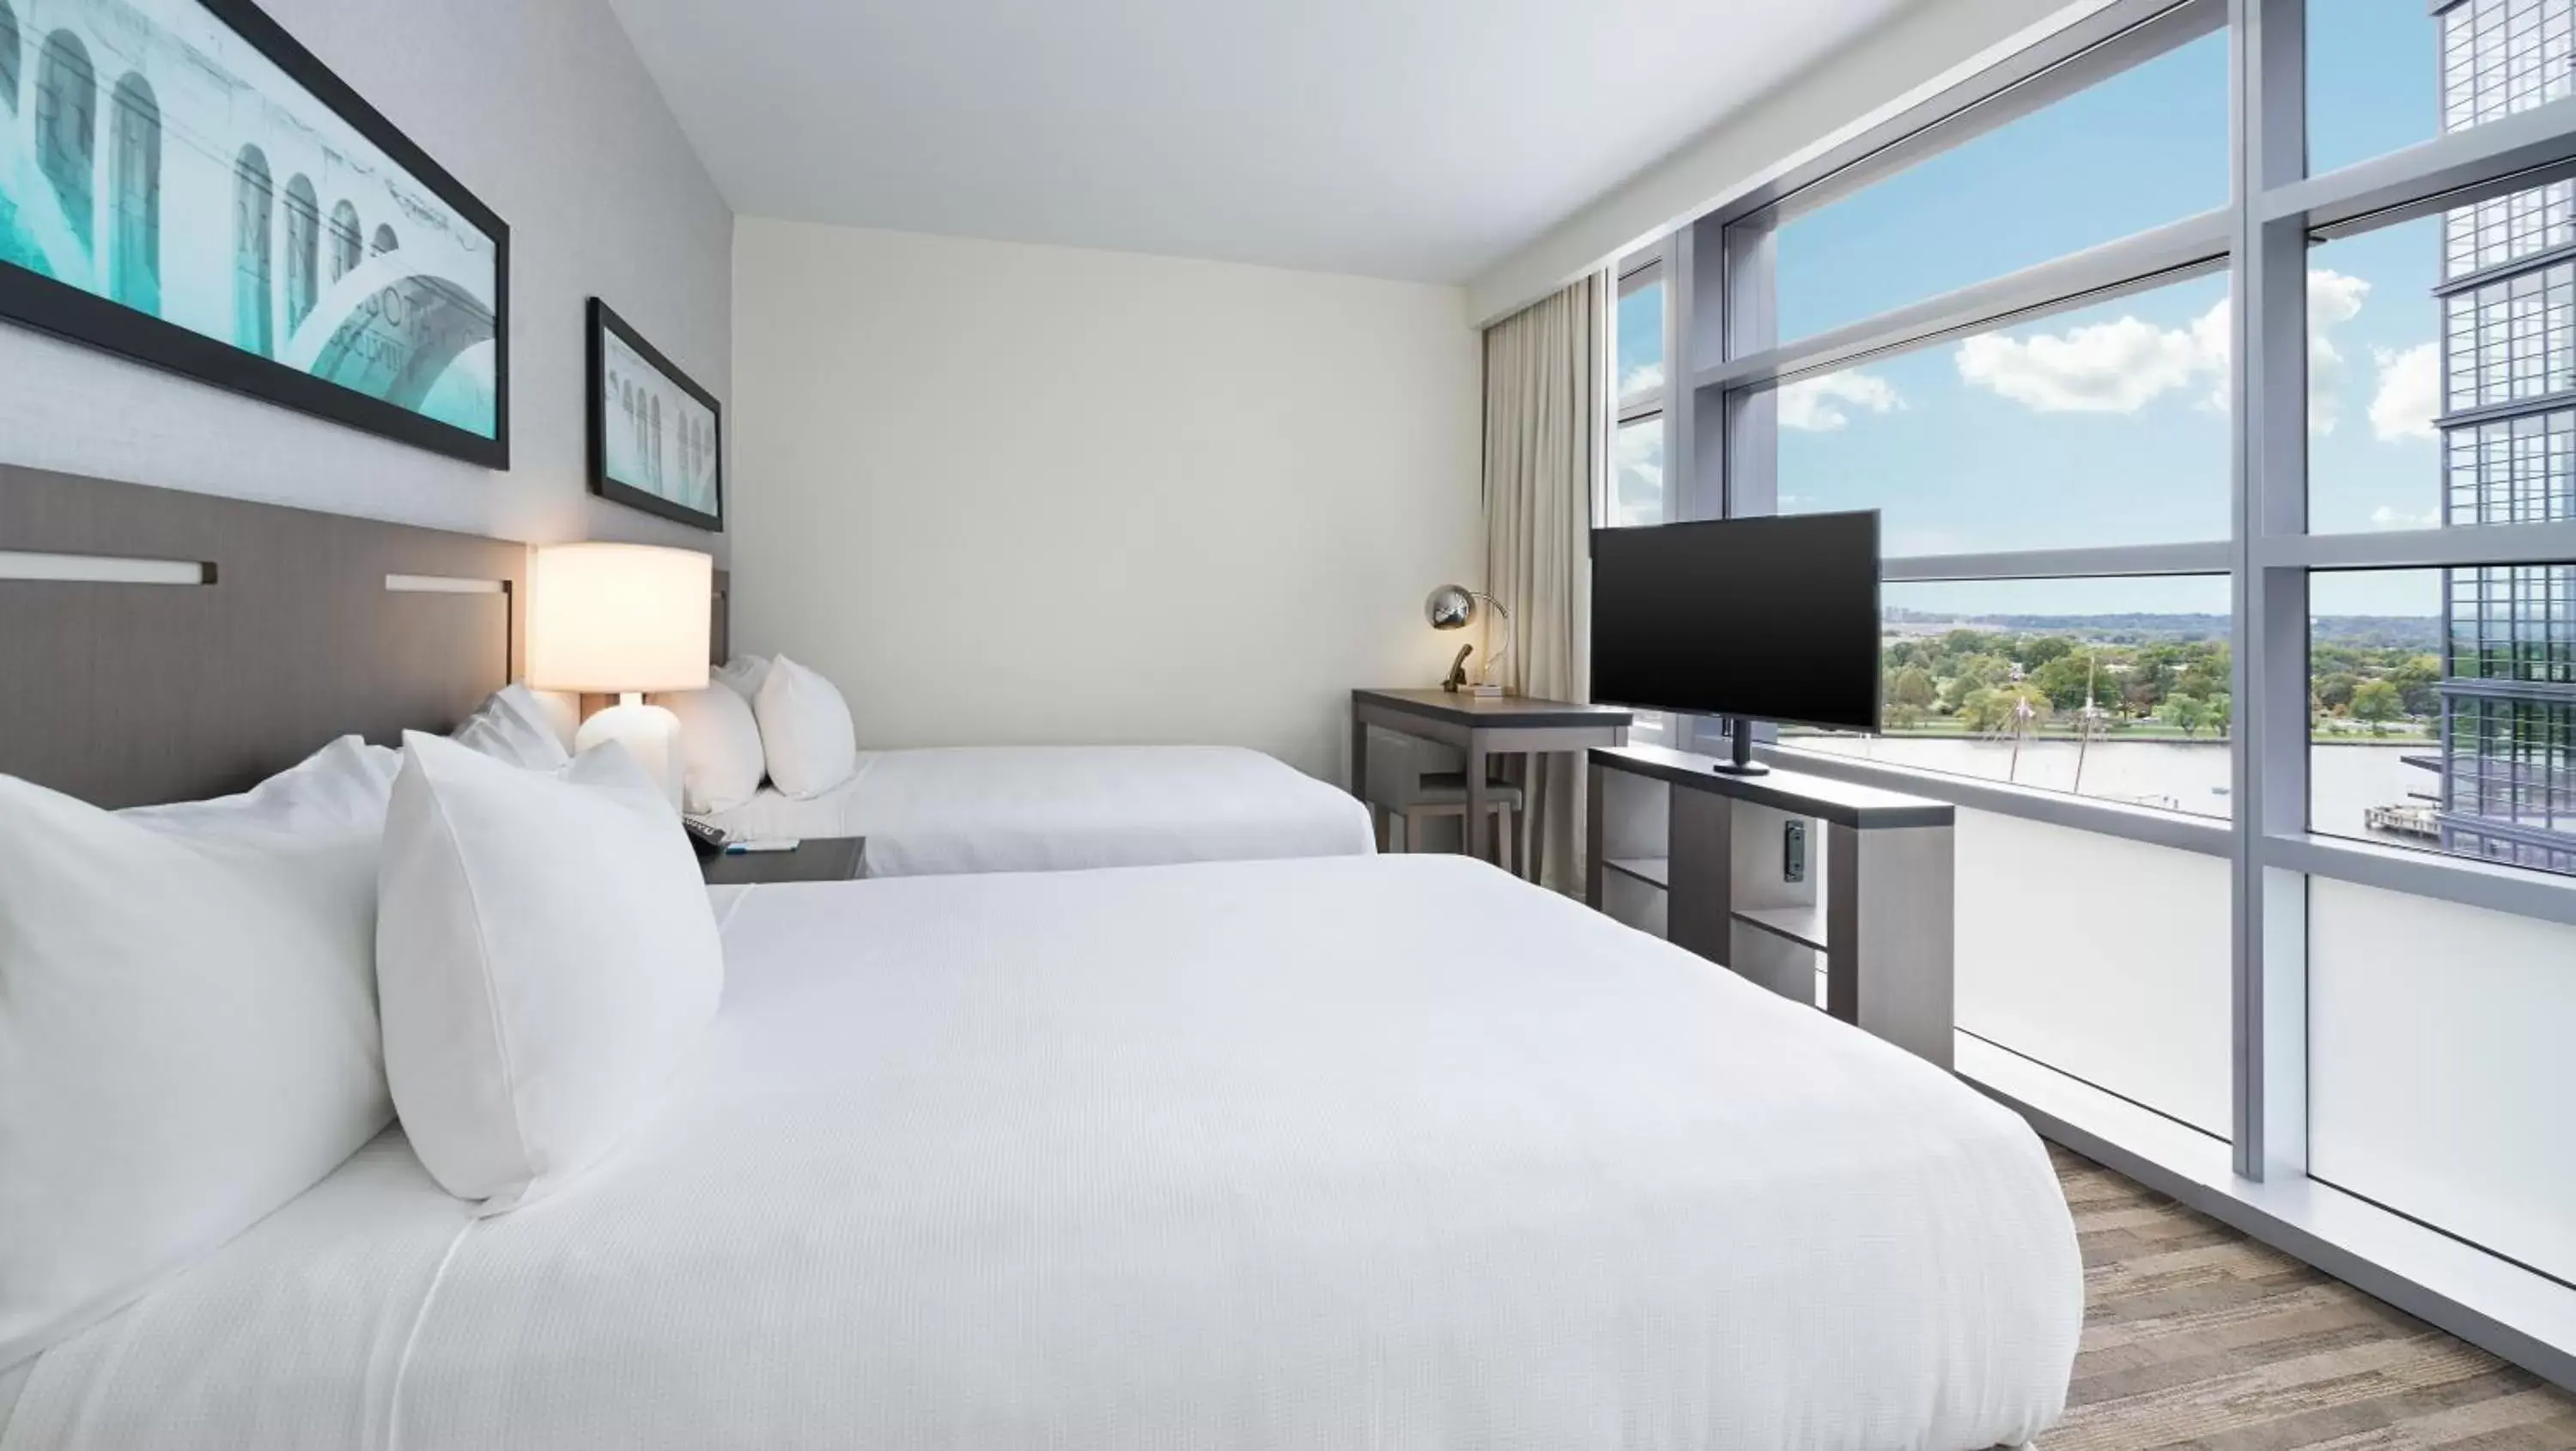 Queen Room with Two Queen Beds and River View in Hyatt House Washington DC/The Wharf